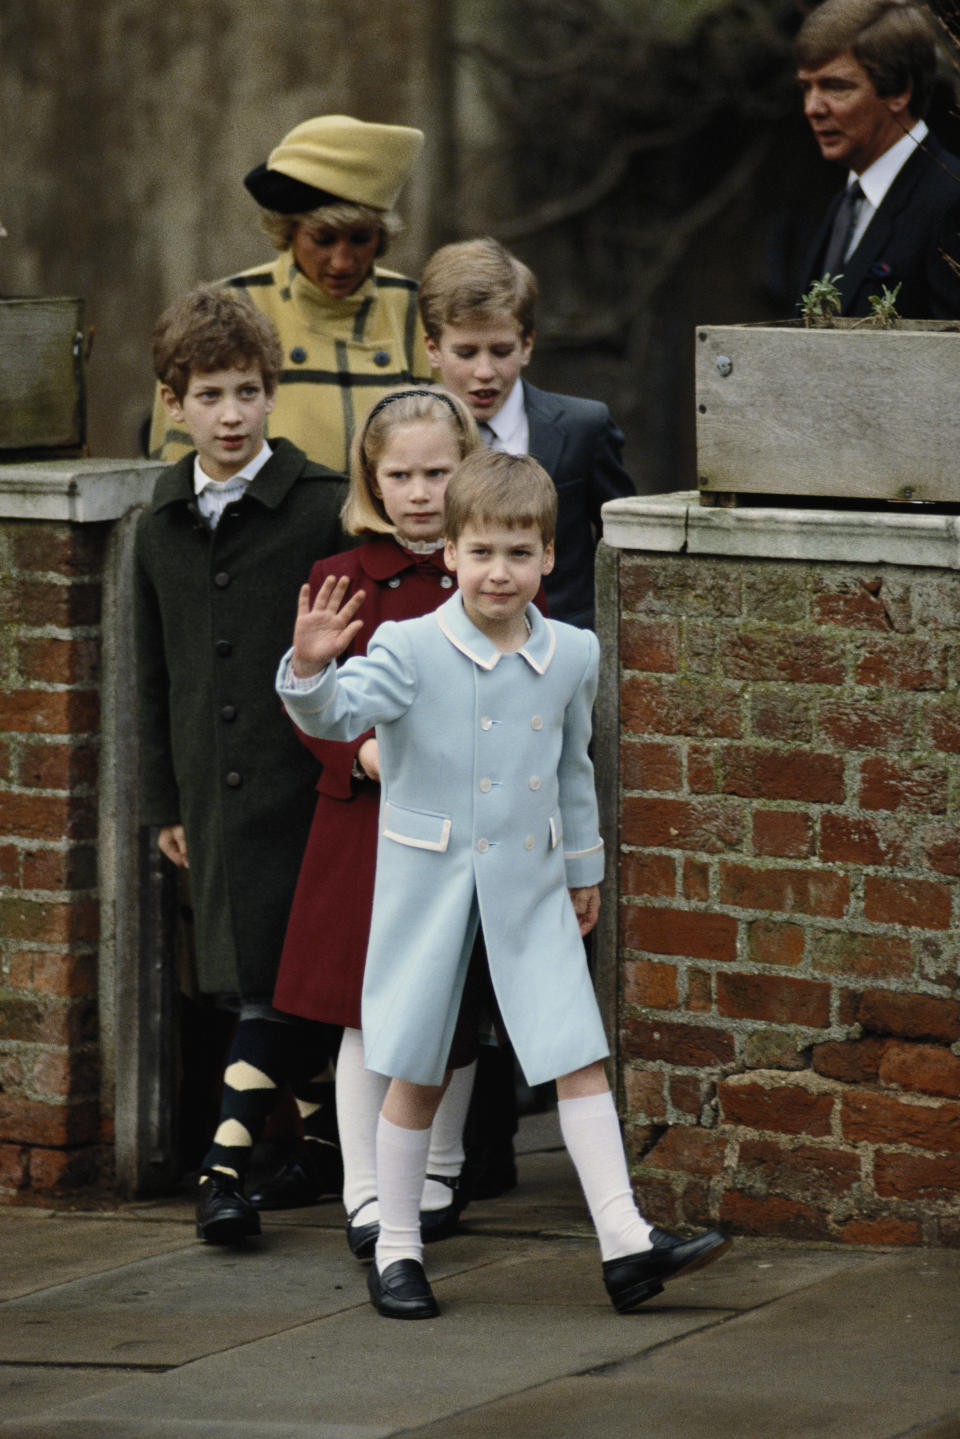 Prince William, Zara Phillips, Peter Phillips, Lord Frederick Windsor and Diana, Princess of Wales (1961 - 1997) leave St George's Chapel in Windsor, after the Christmas service, 25th December 1987.  (Photo by Tim Graham Photo Library via Getty Images)